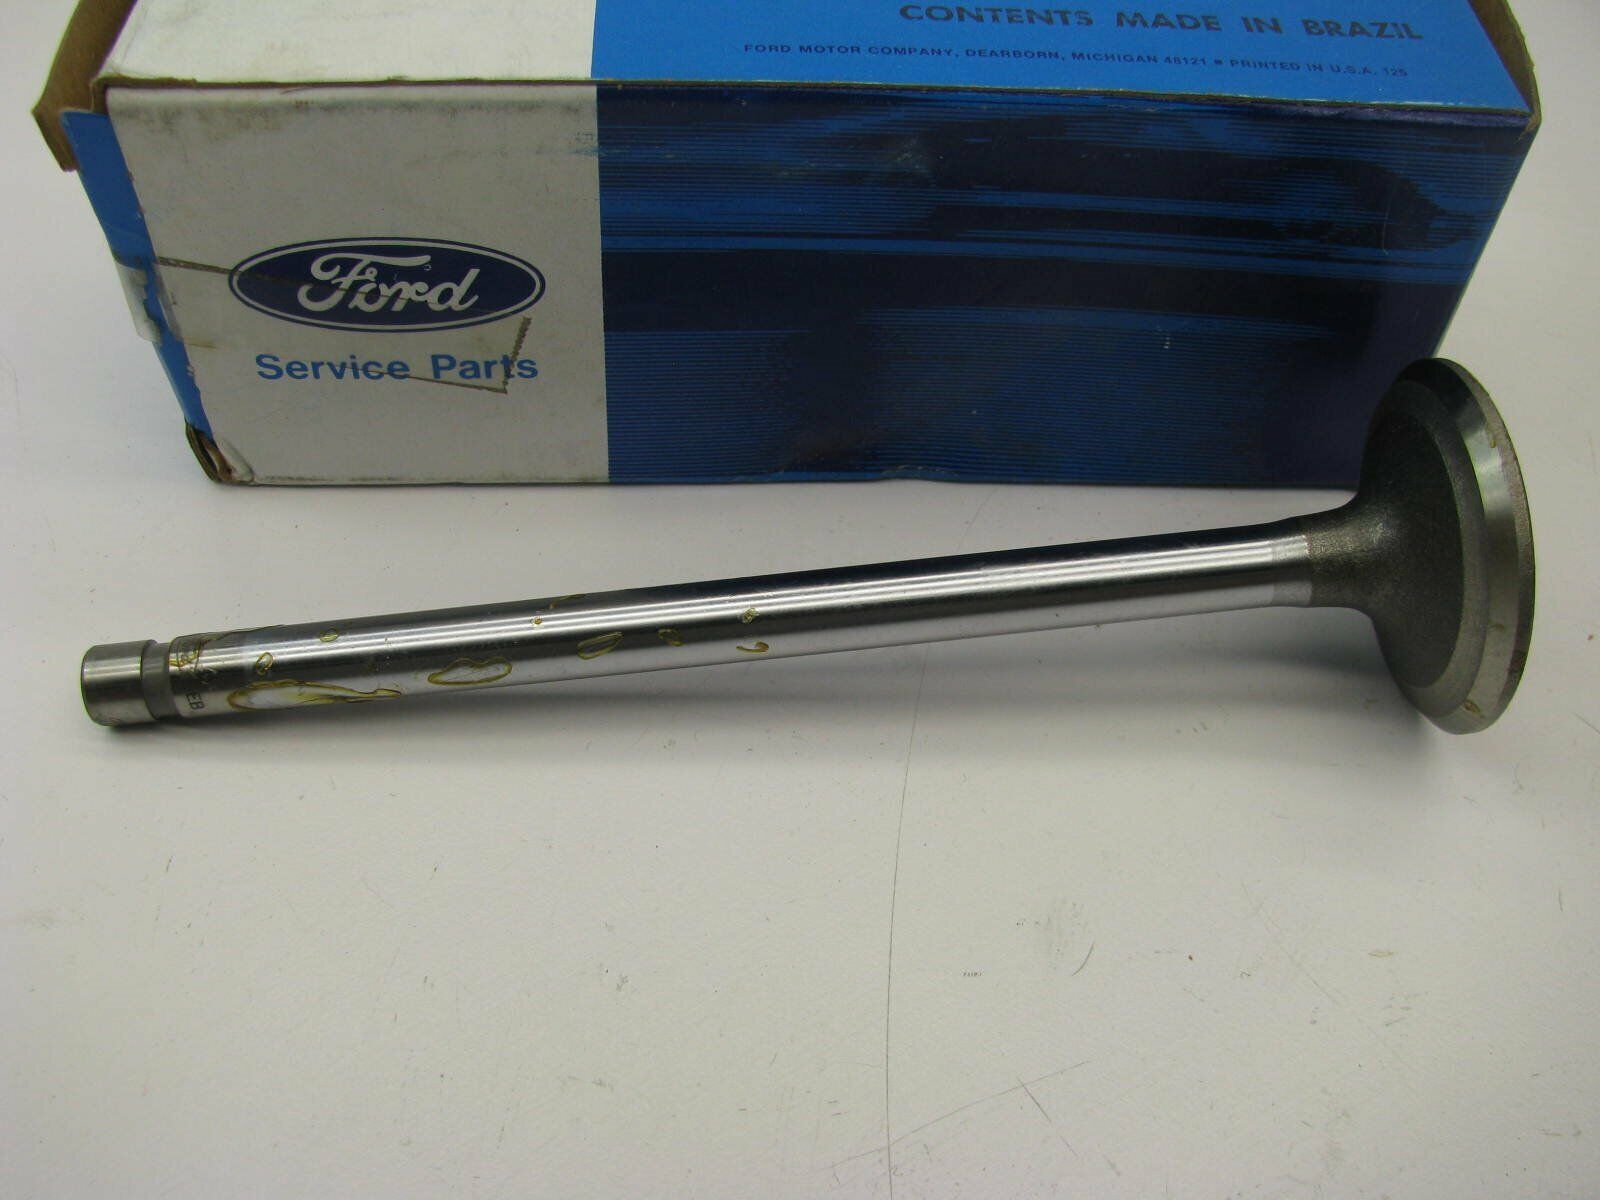 NEW - OEM Ford E7HZ-6505-A Engine Exhaust Valve 1987-94 6.6L 7.8L-L6 FTO Diesel